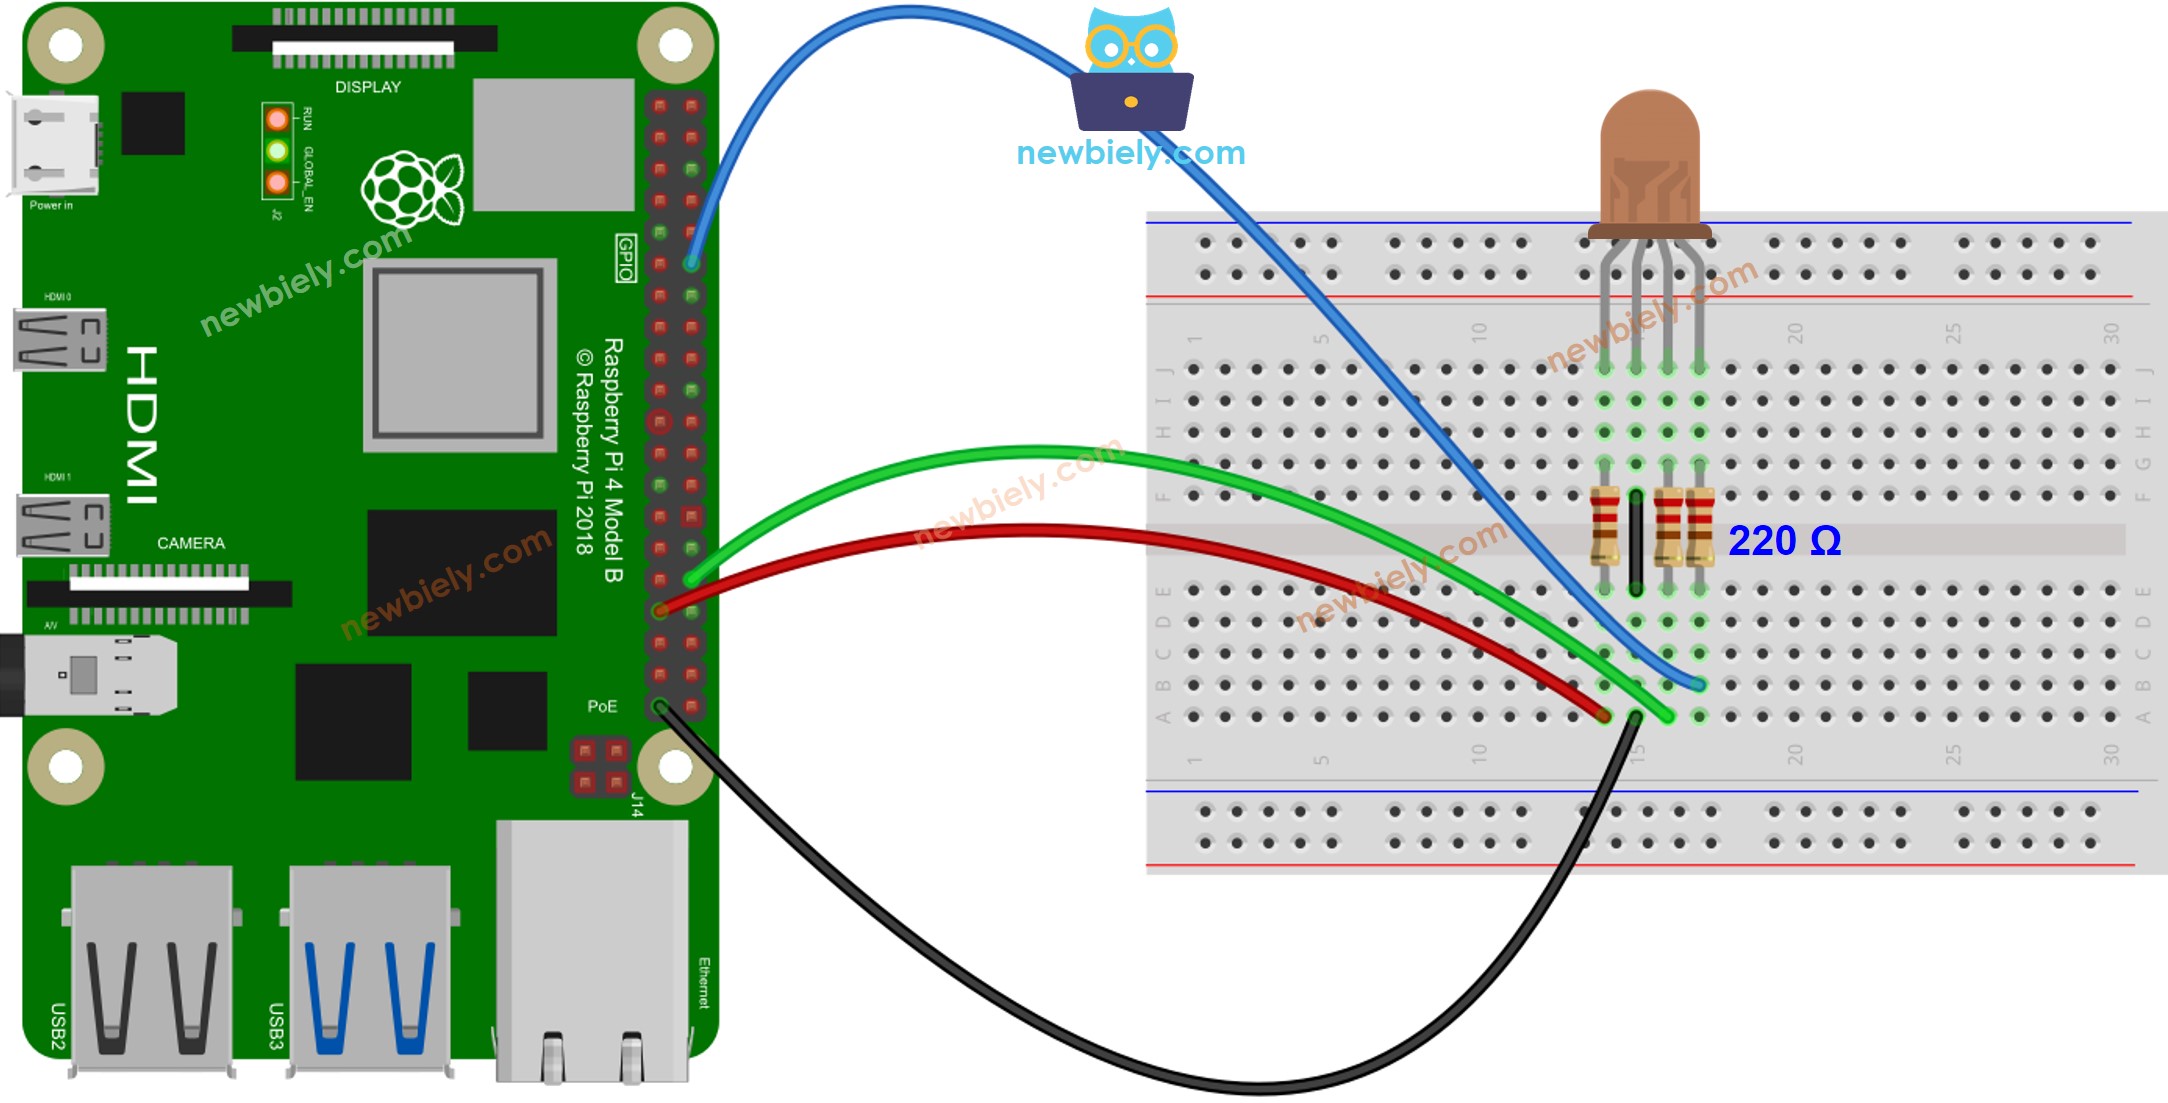 The wiring diagram between Raspberry Pi and RGB LED